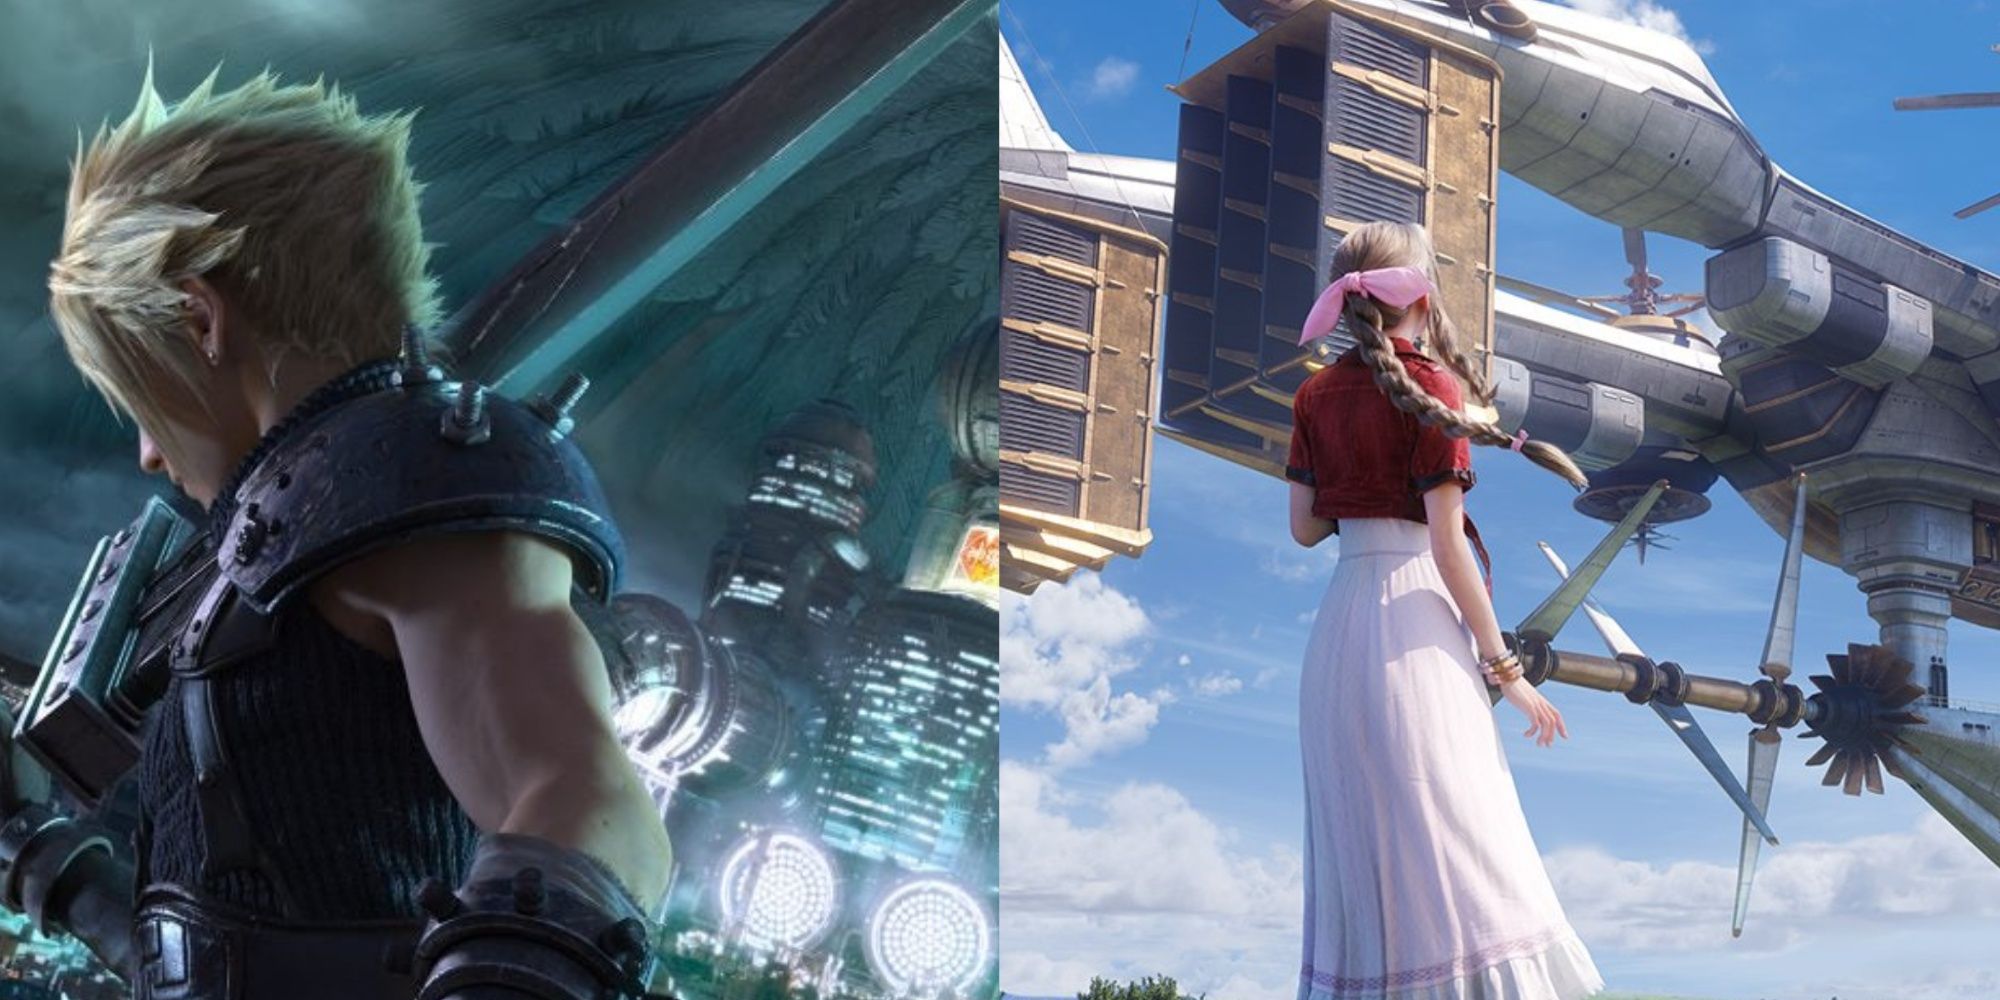 final fantasy 7 remake rebirth which one is better featured image with key art